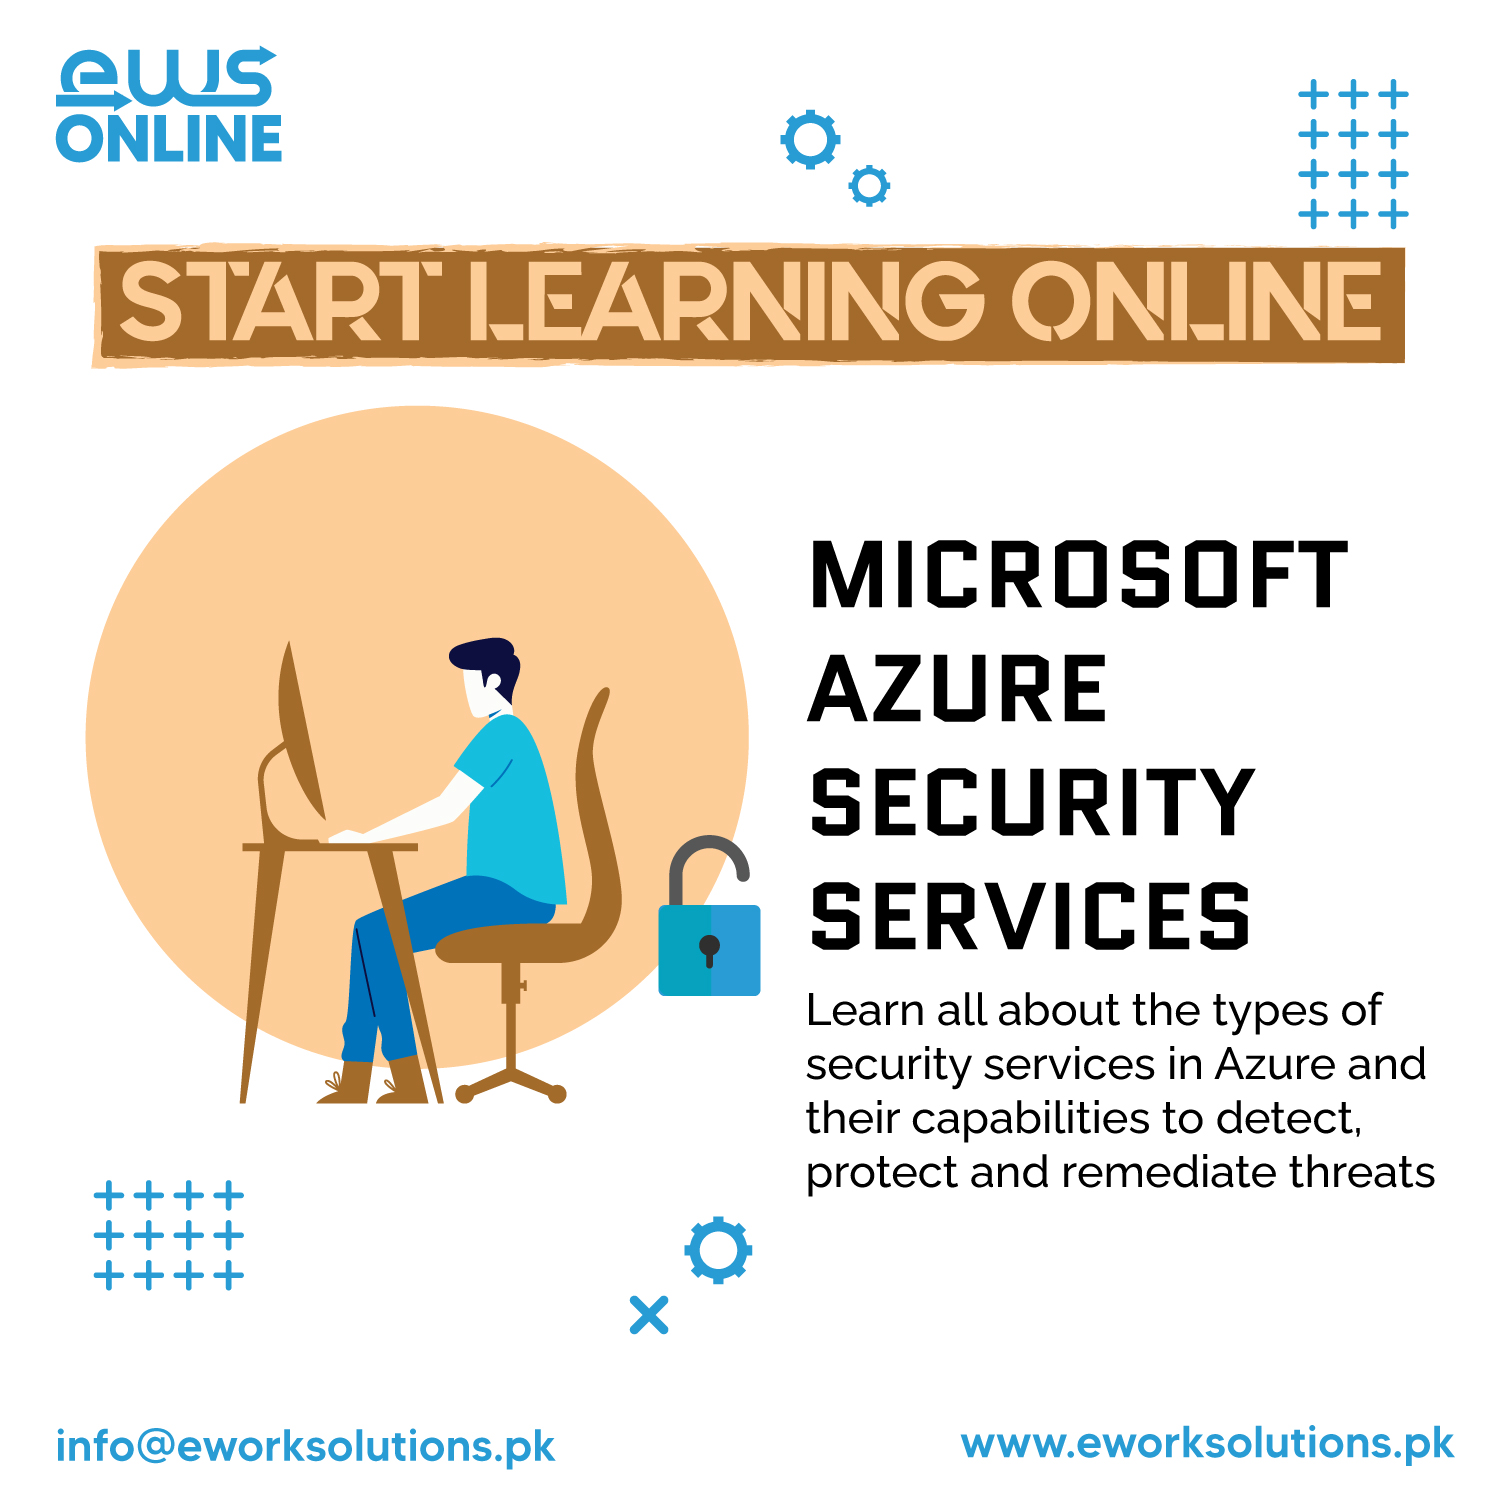 Microsoft Azure Security Services